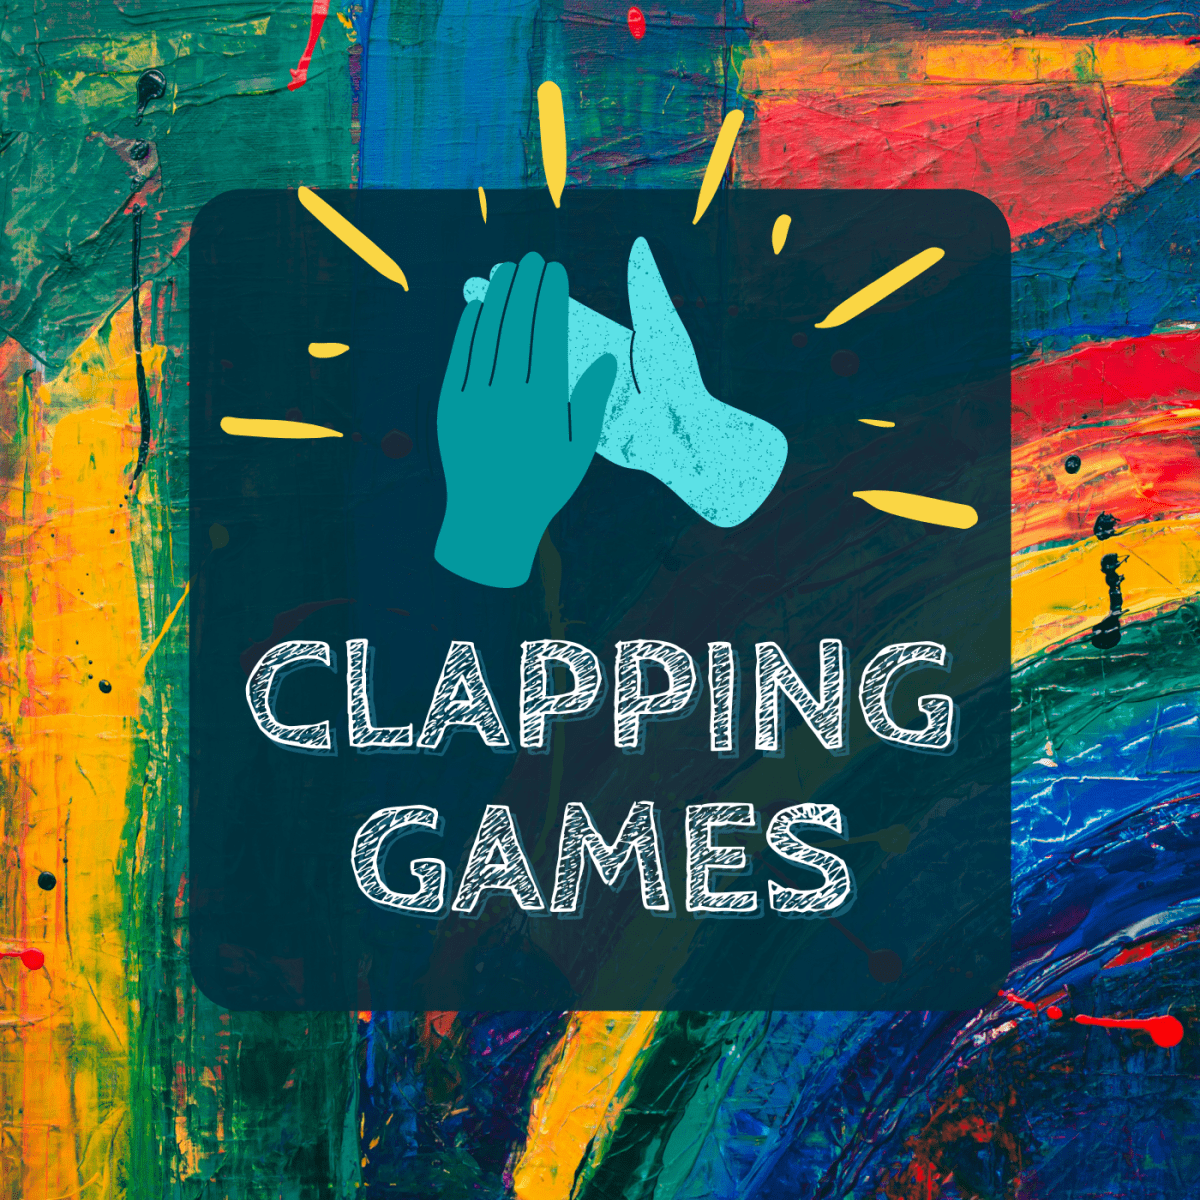 20 Engaging And Fun Hand Clapping Games For Kids